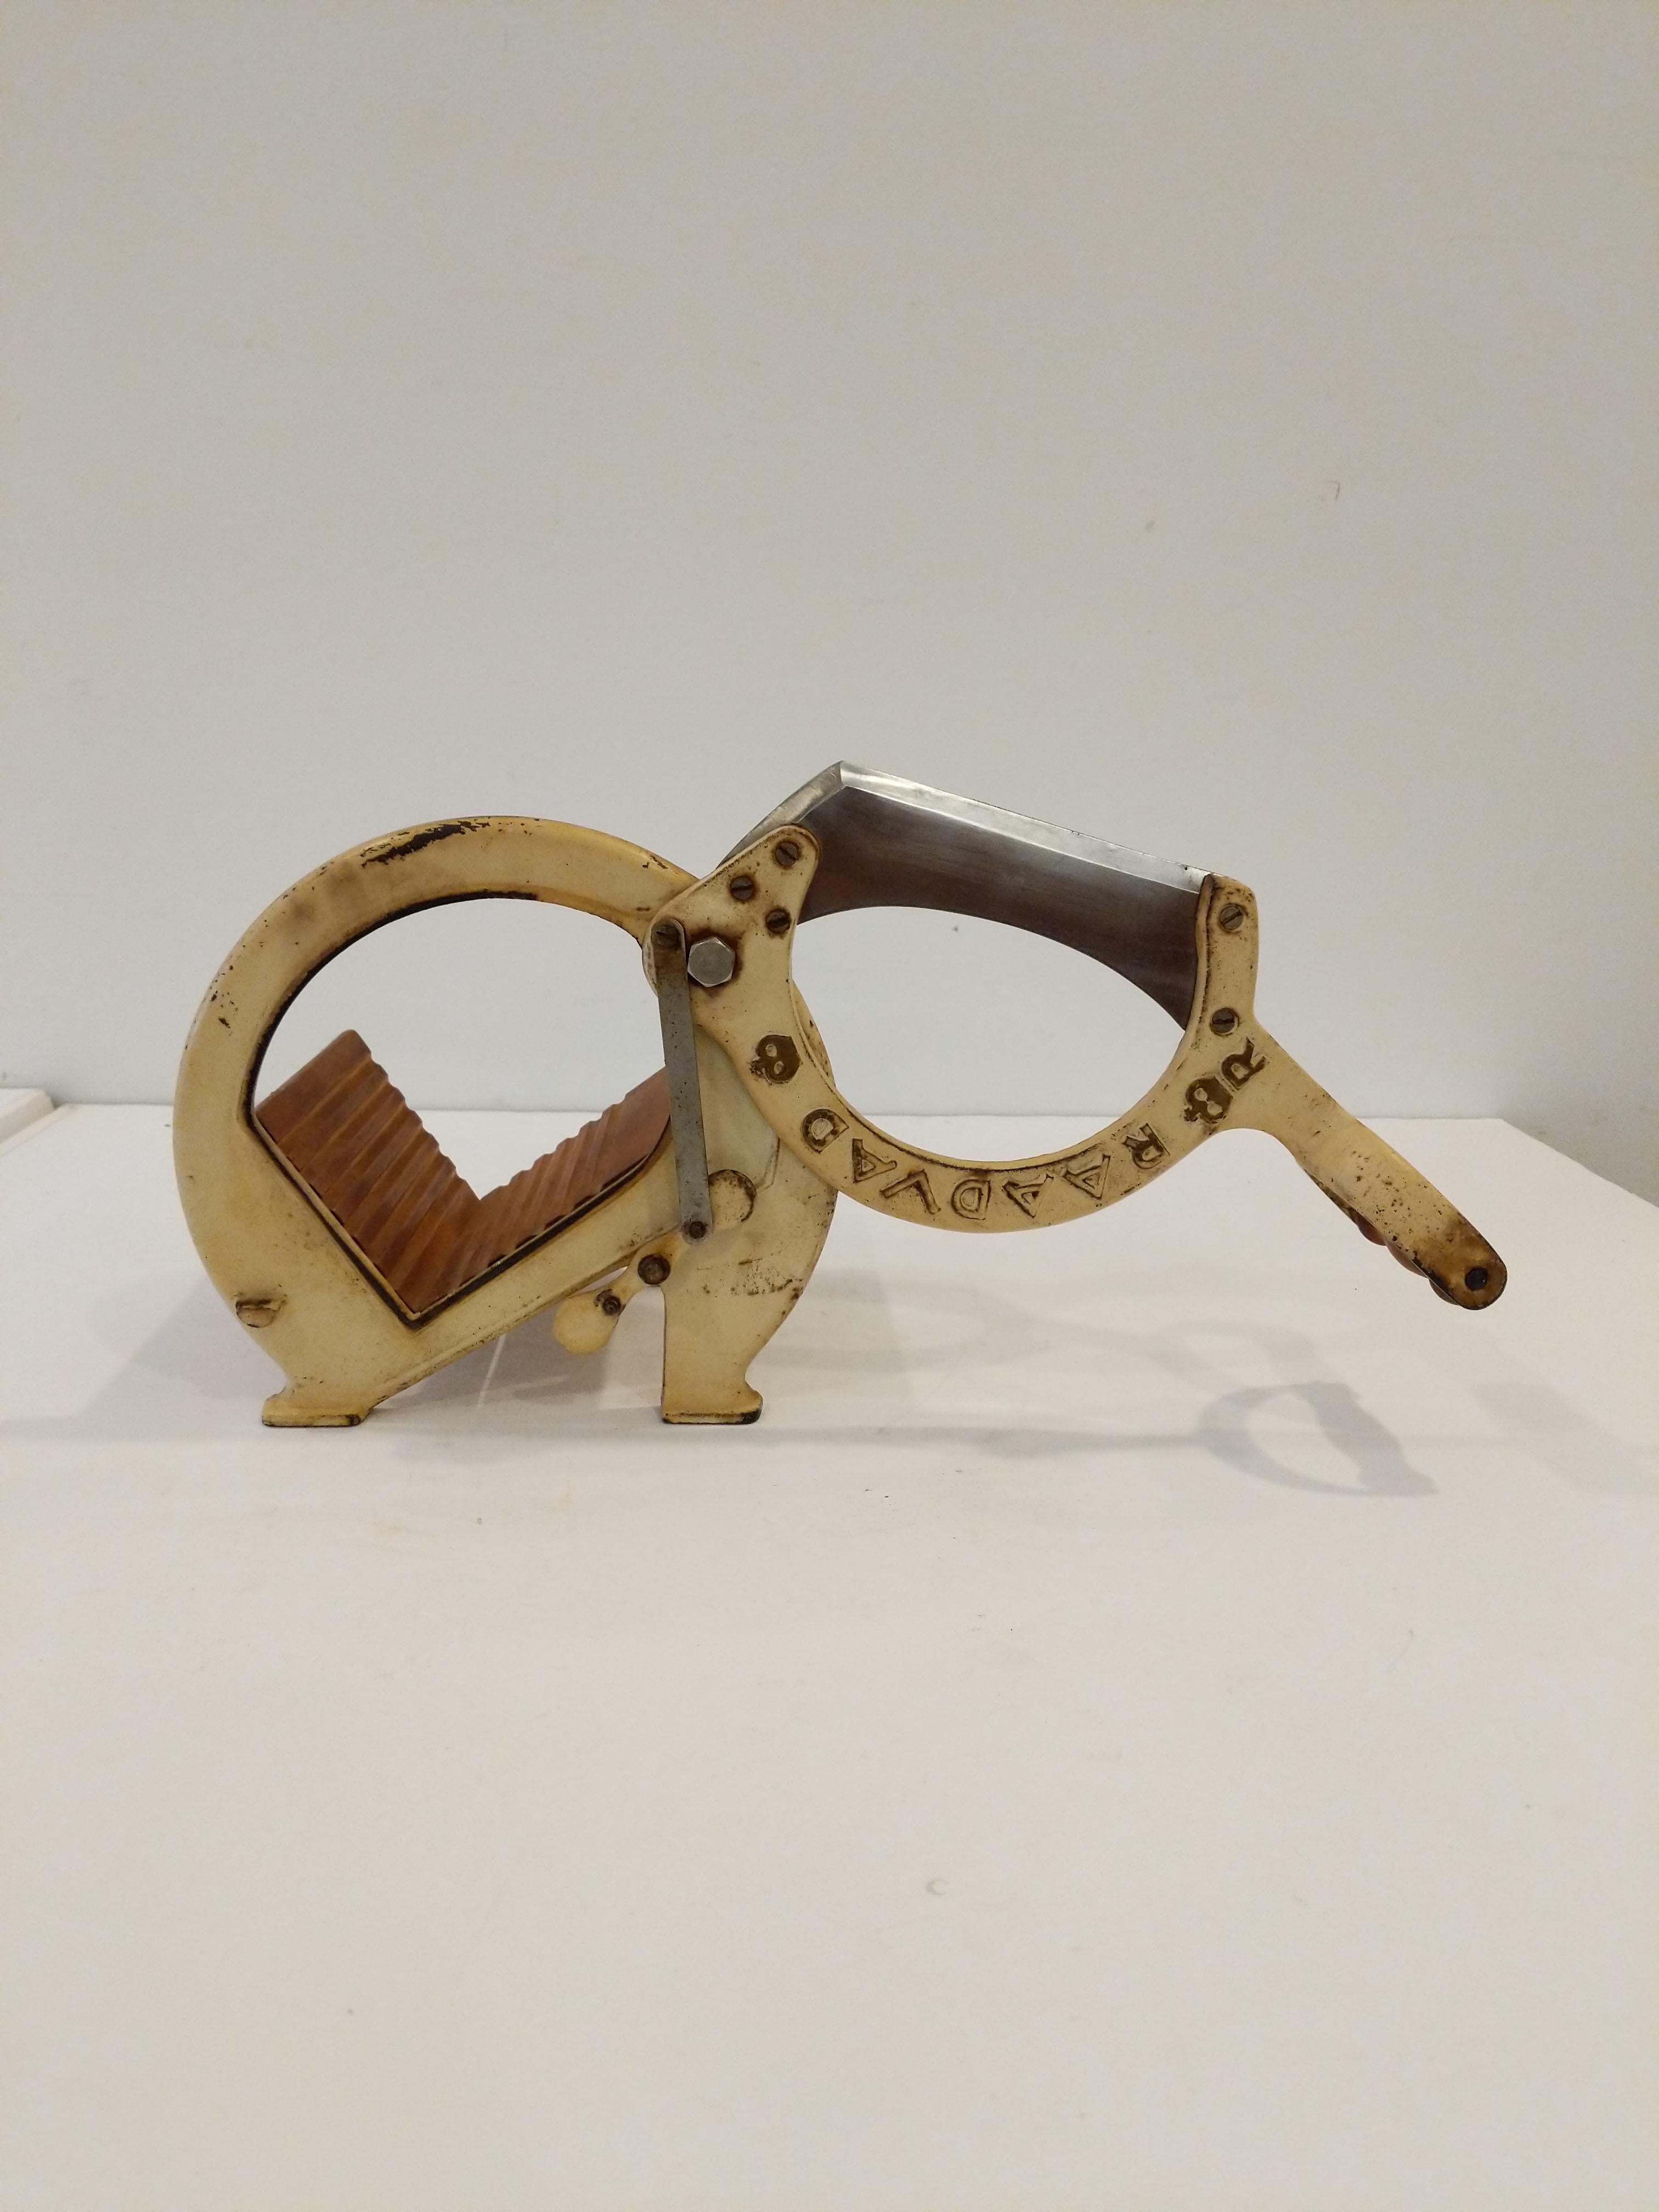 Vintage Raadvad Bread Slicer In Good Condition For Sale In Gardiner, NY